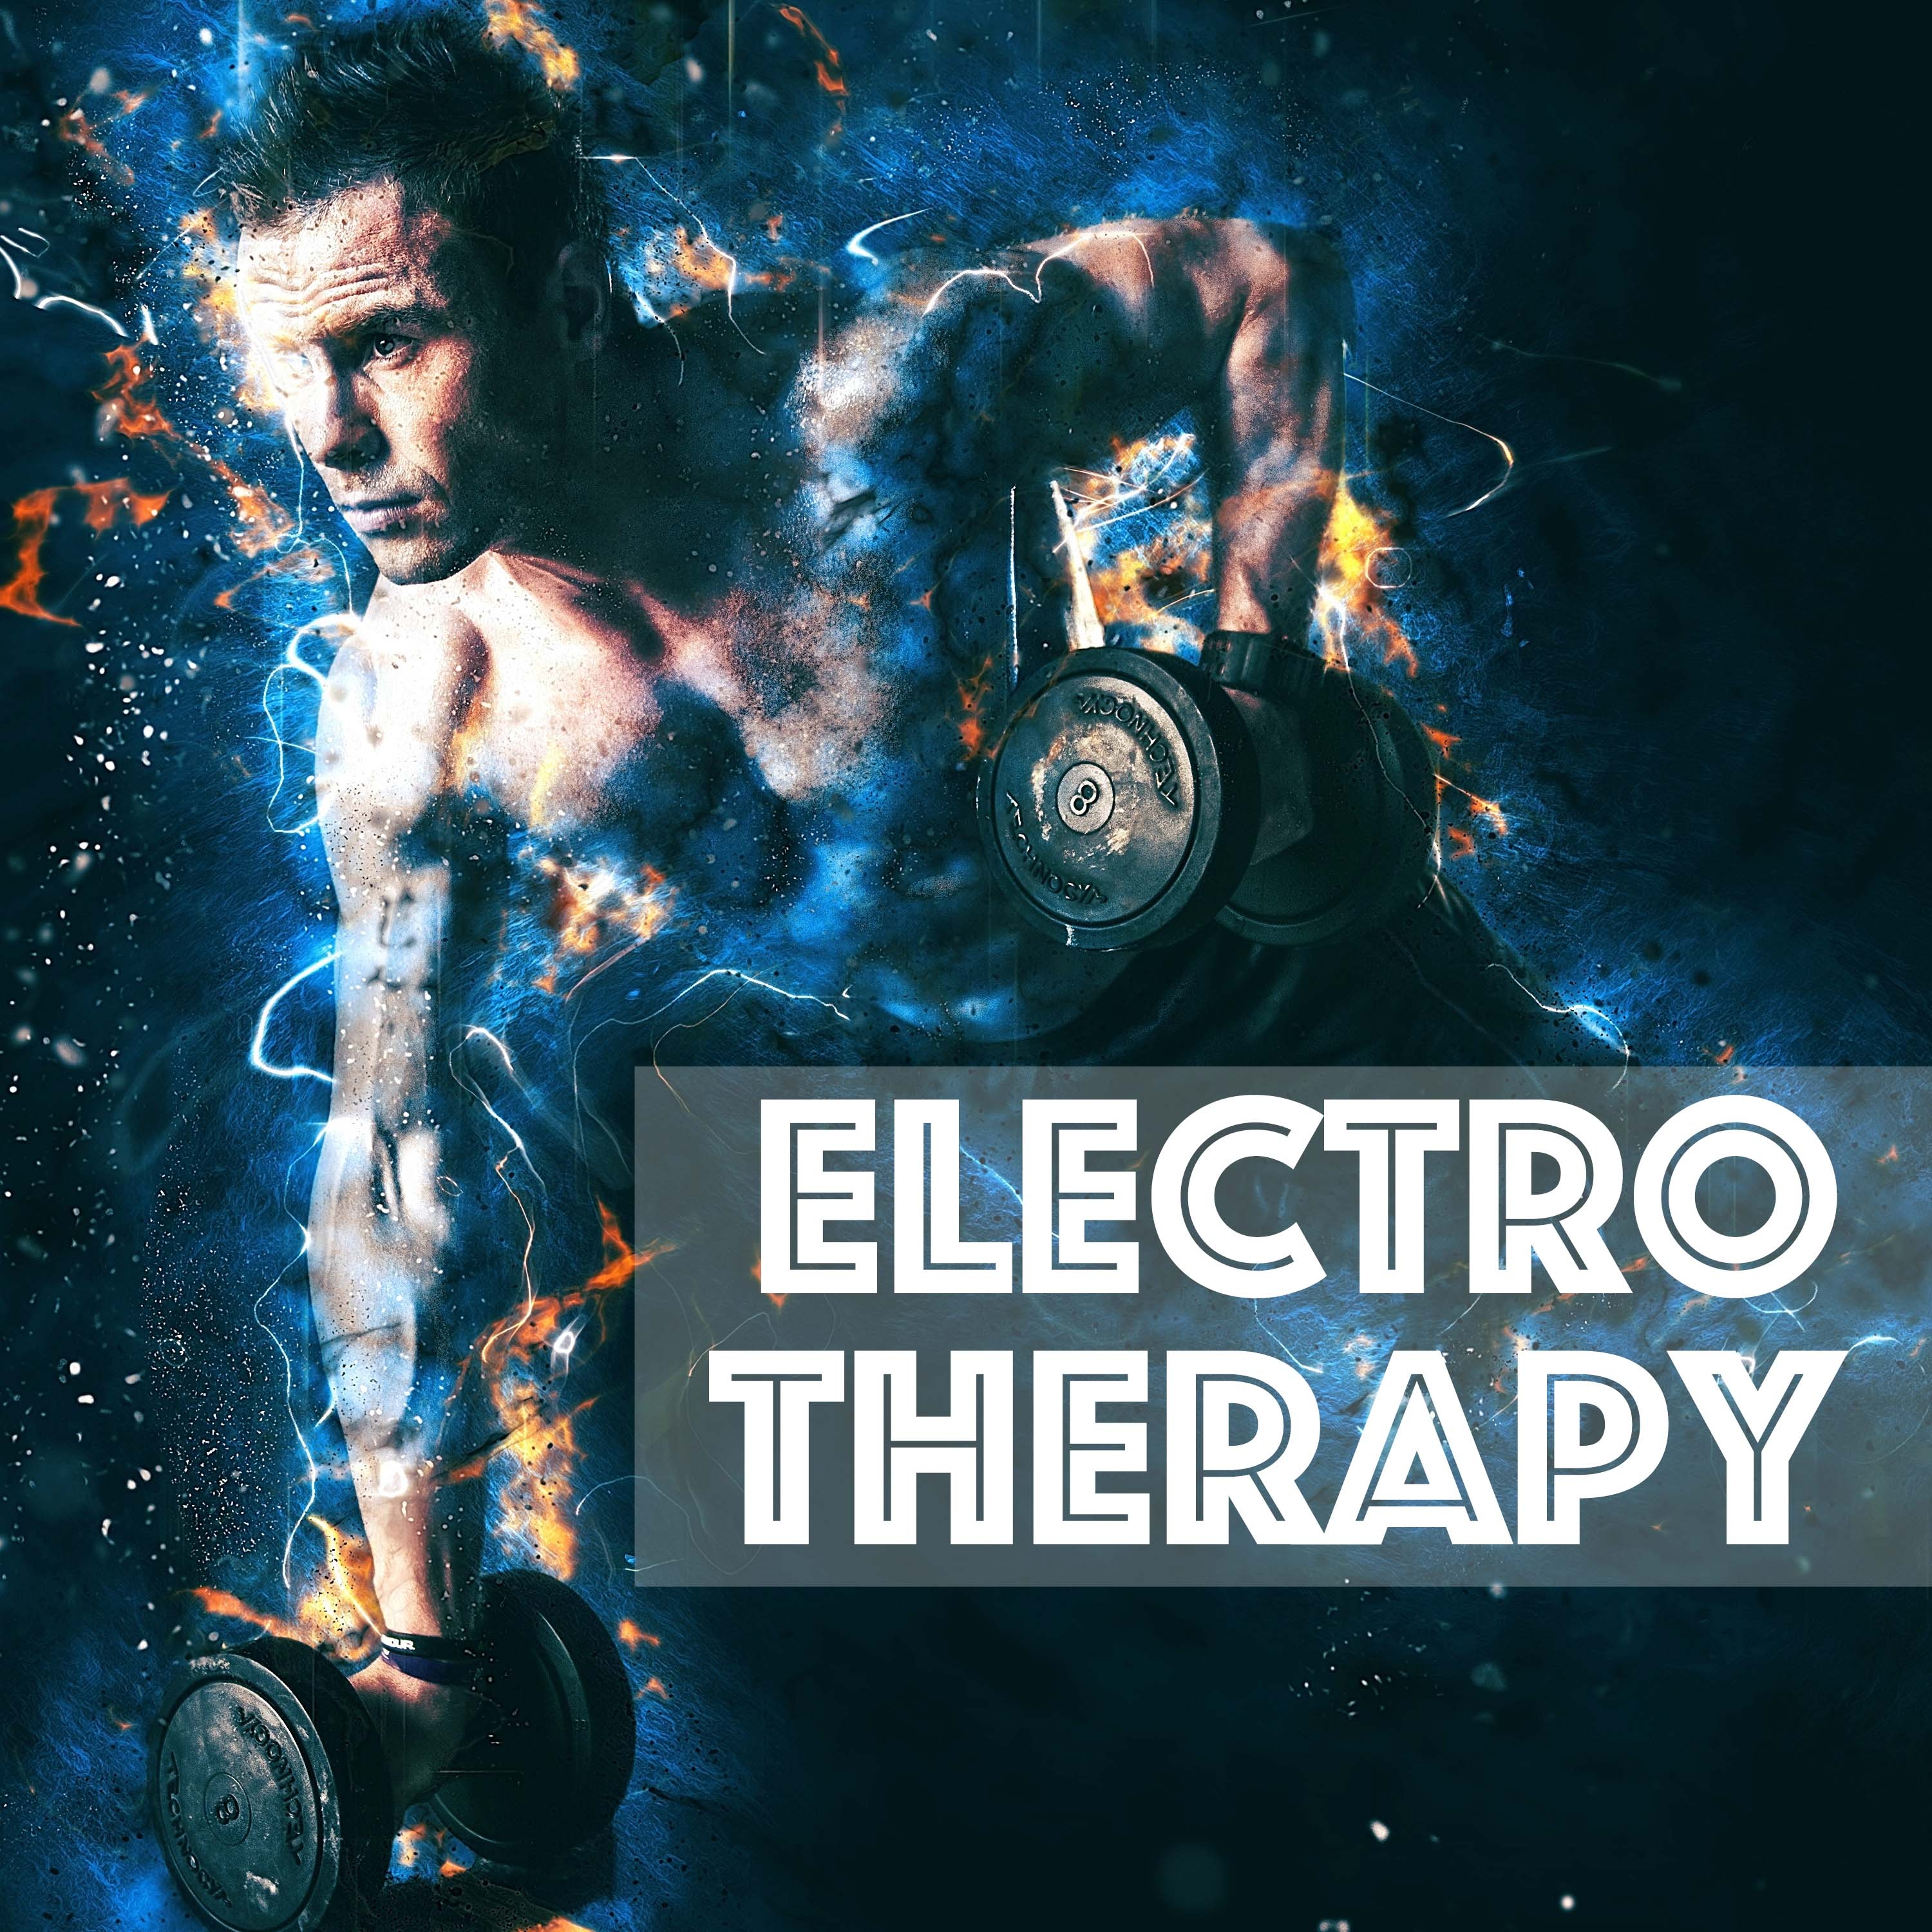 Electro Therapy - Motivational Electronic Playlist 2018 for Energy Boost and Intense Training